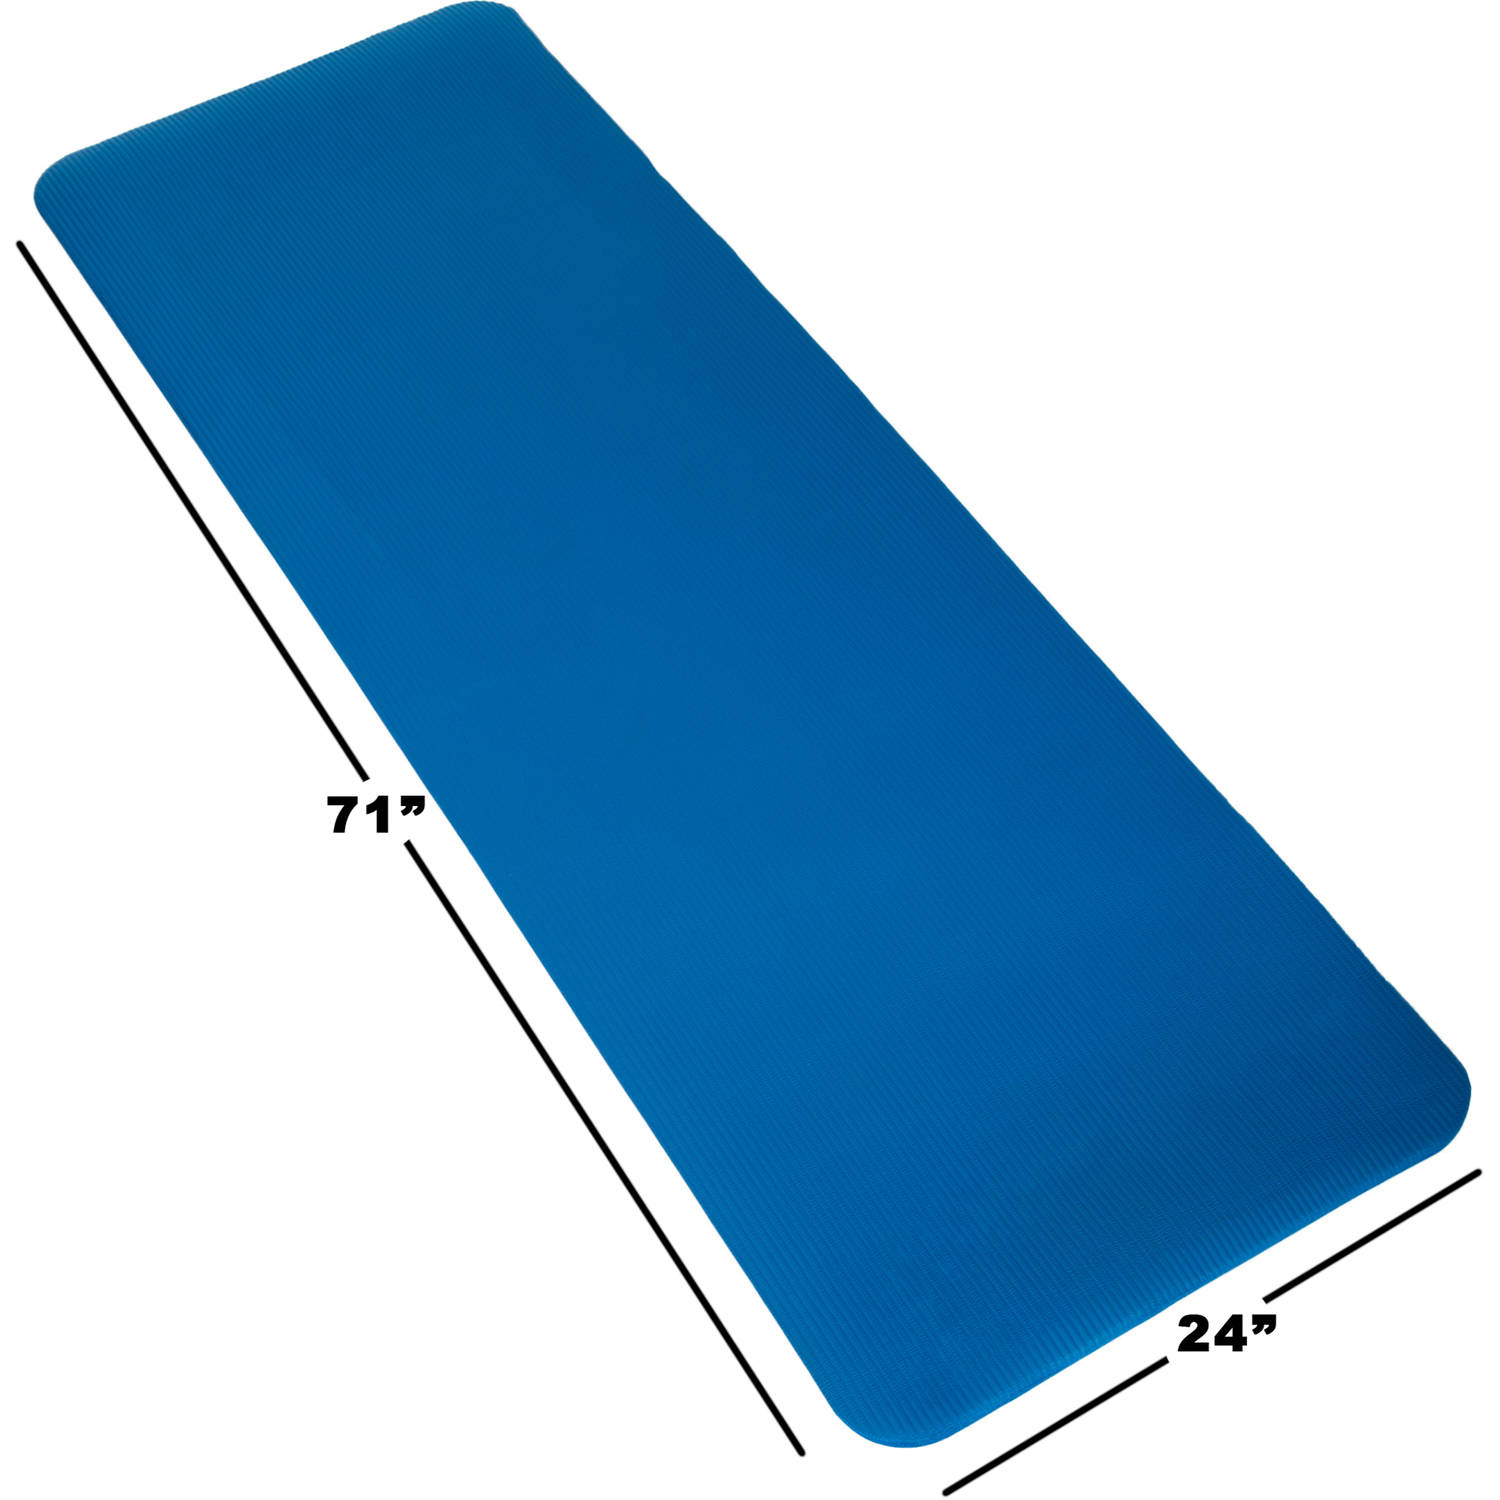 Wakeman Fitness Extra-Thick Yoga Exercise Mat, Available in Various Colors - image 4 of 6